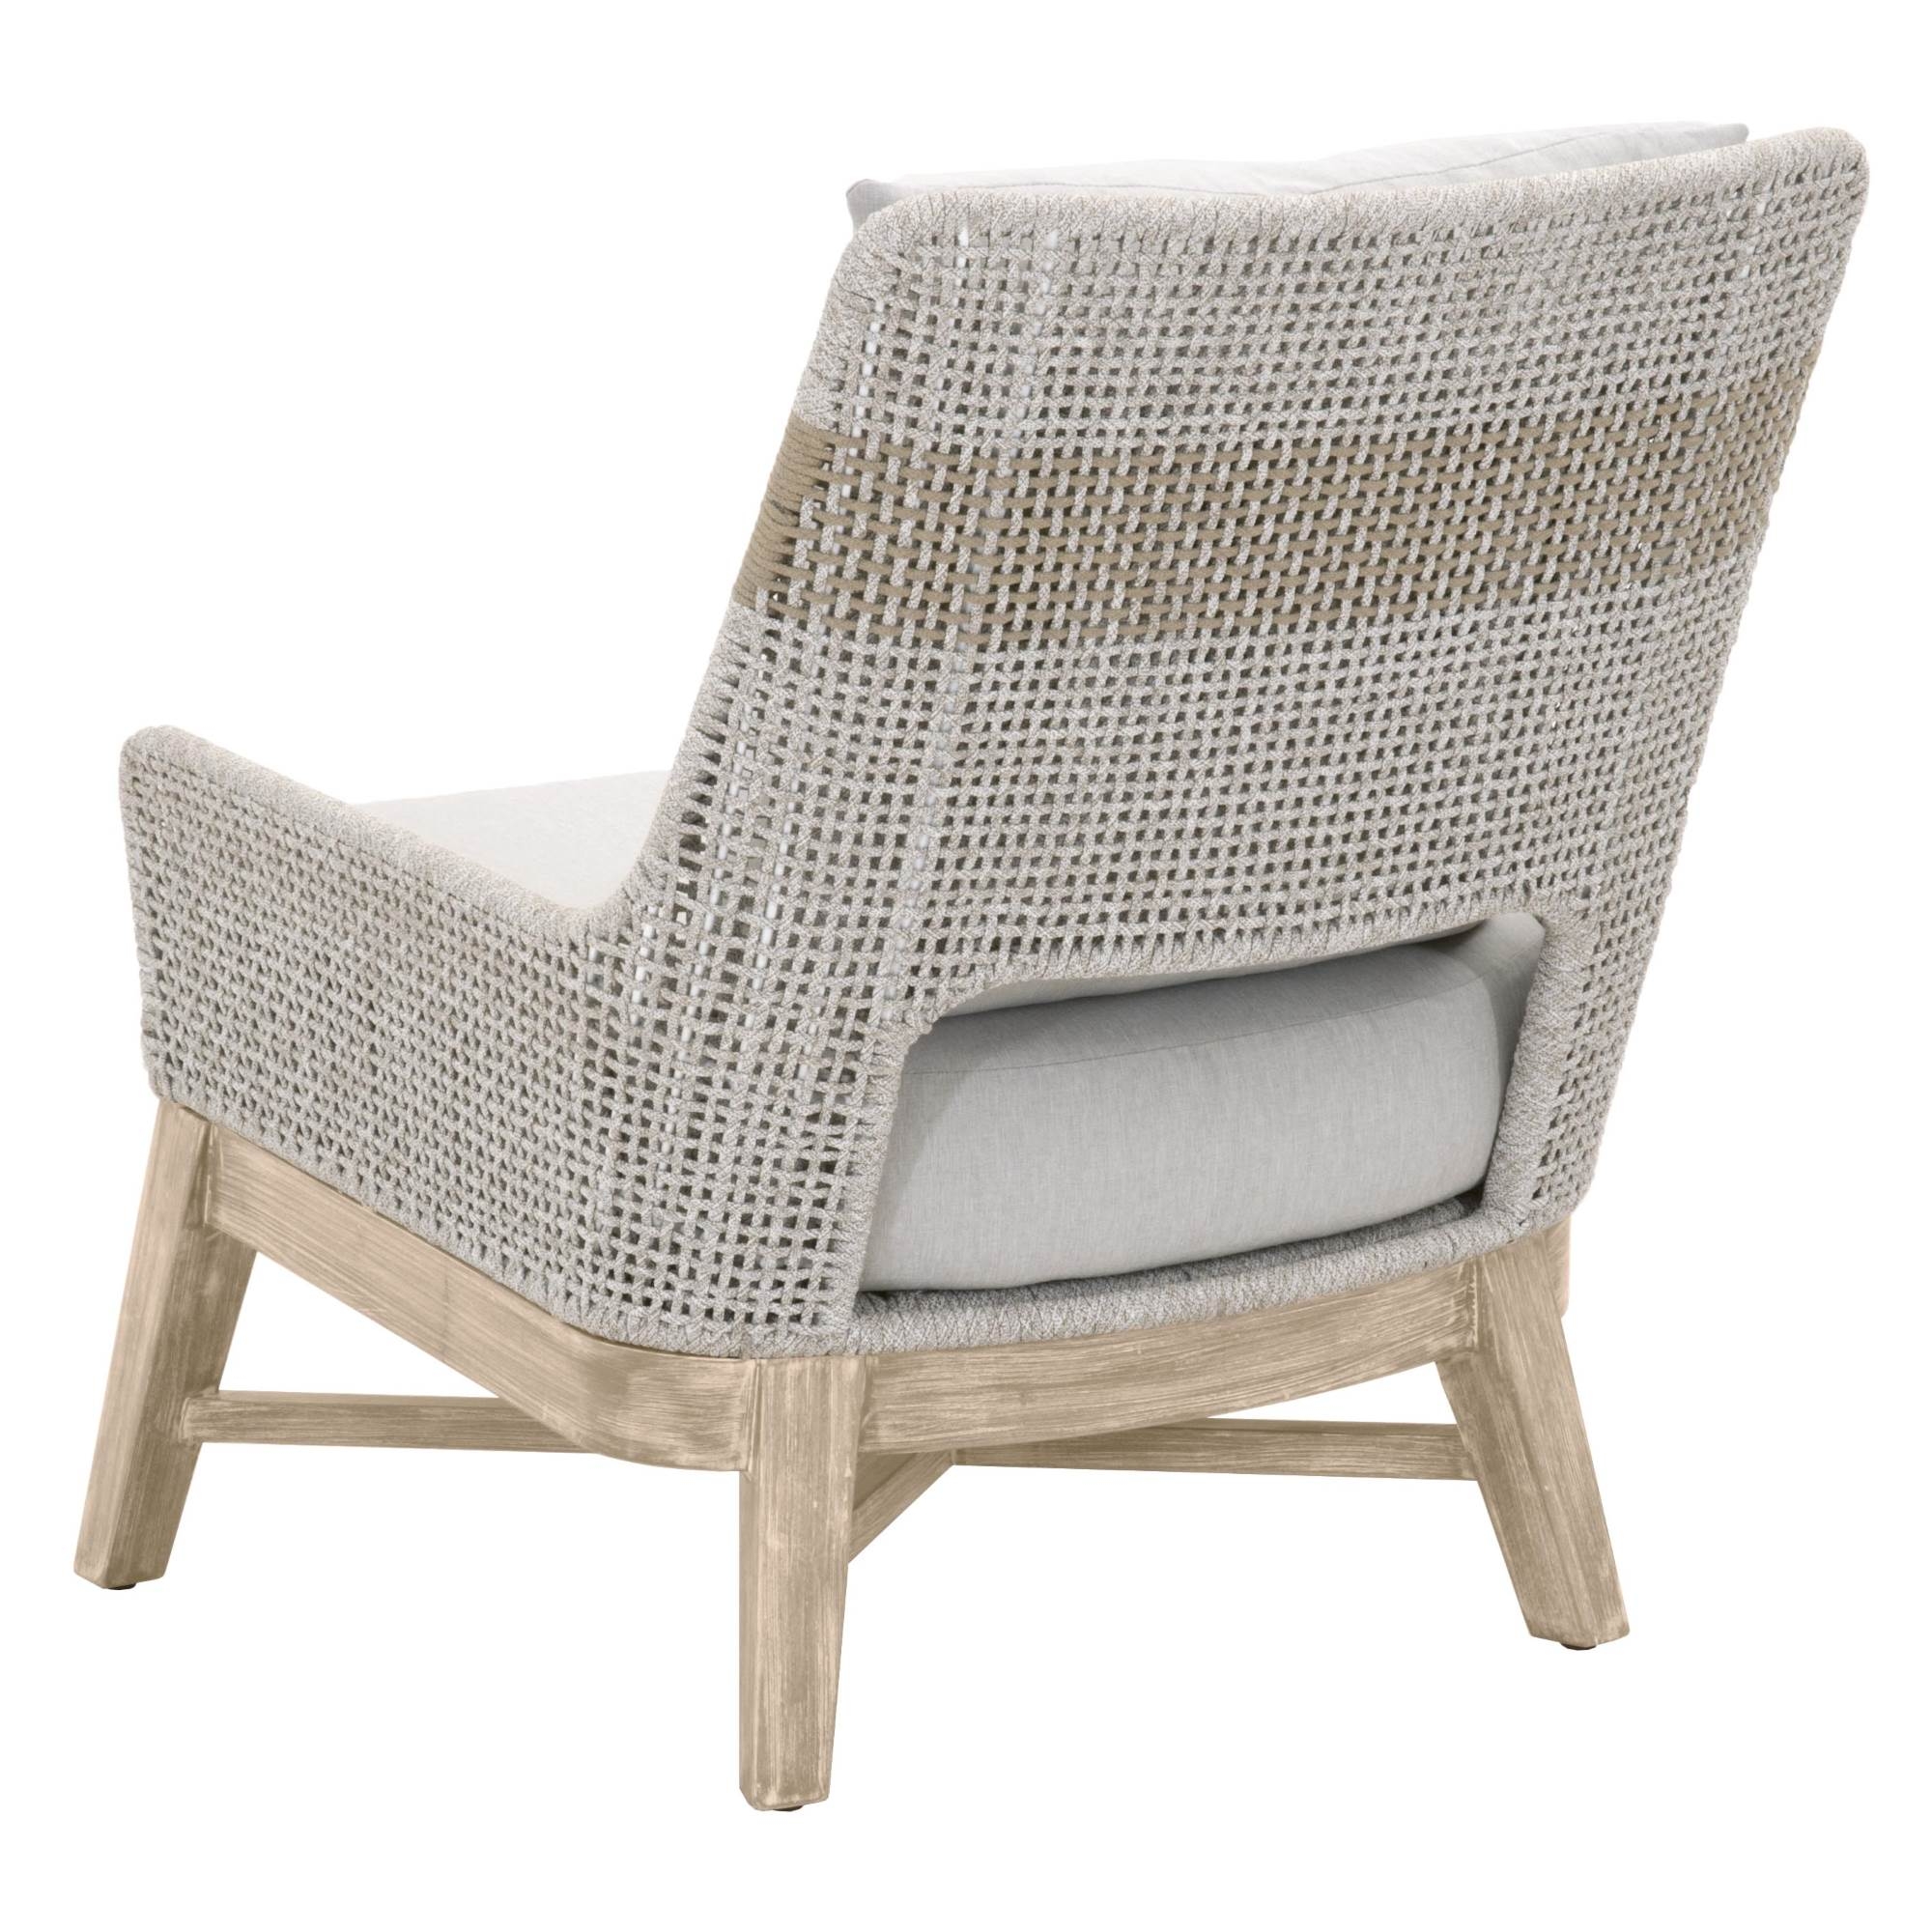 Panorama Indoor/Outdoor Club Chair, White Taupe - Image 3